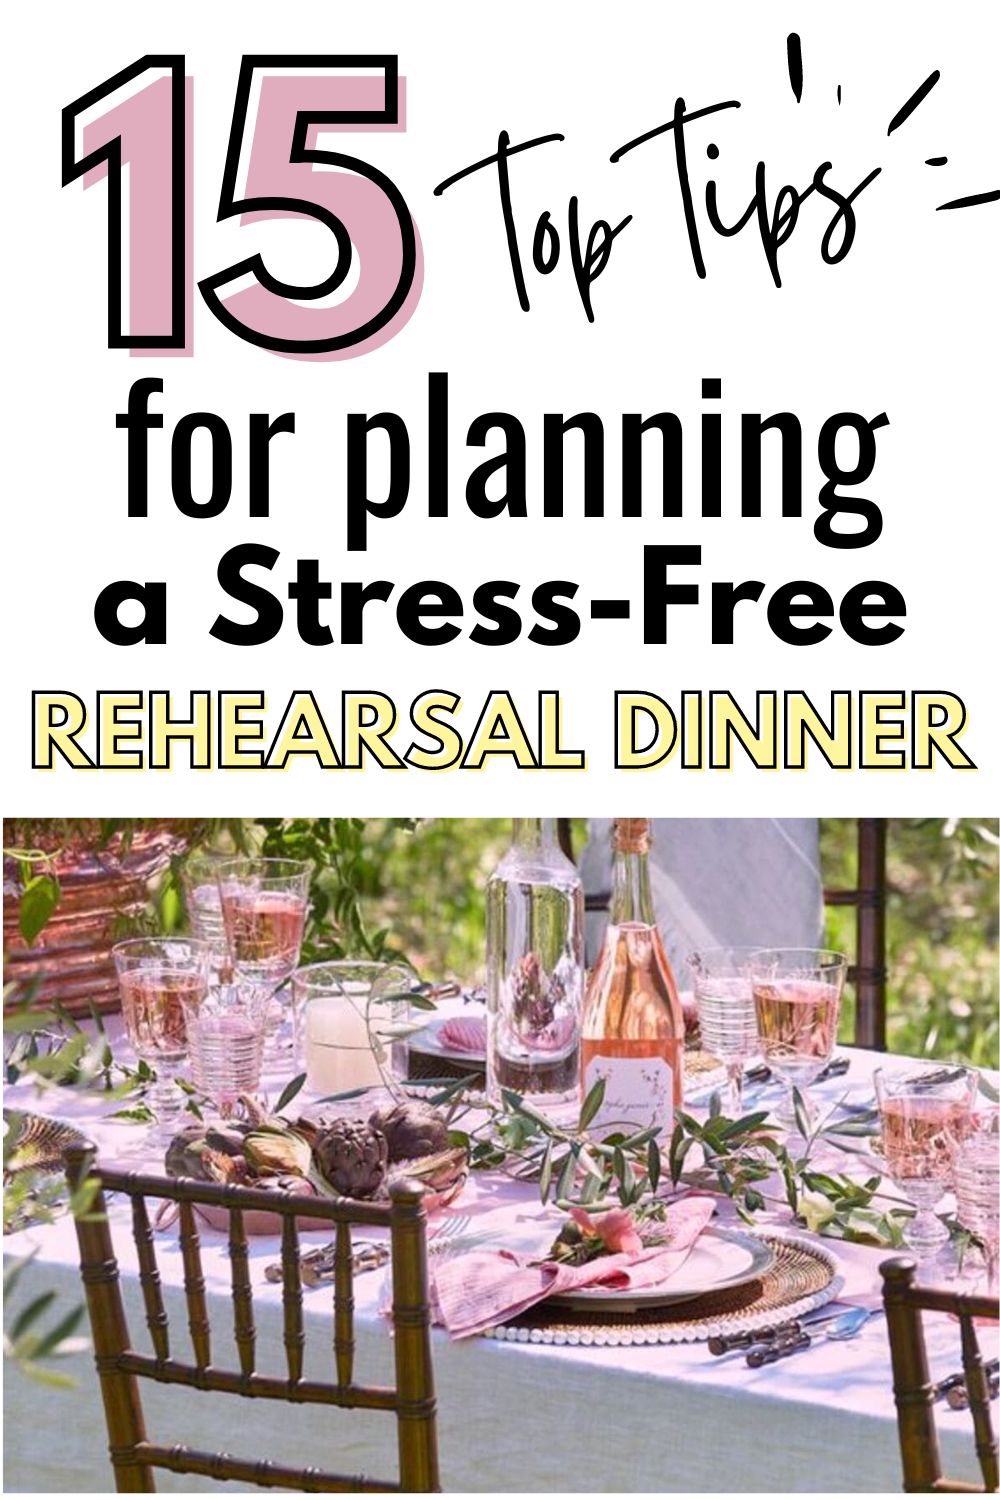 15 Top Tips for Planning a Stress-Free Rehearsal Dinner